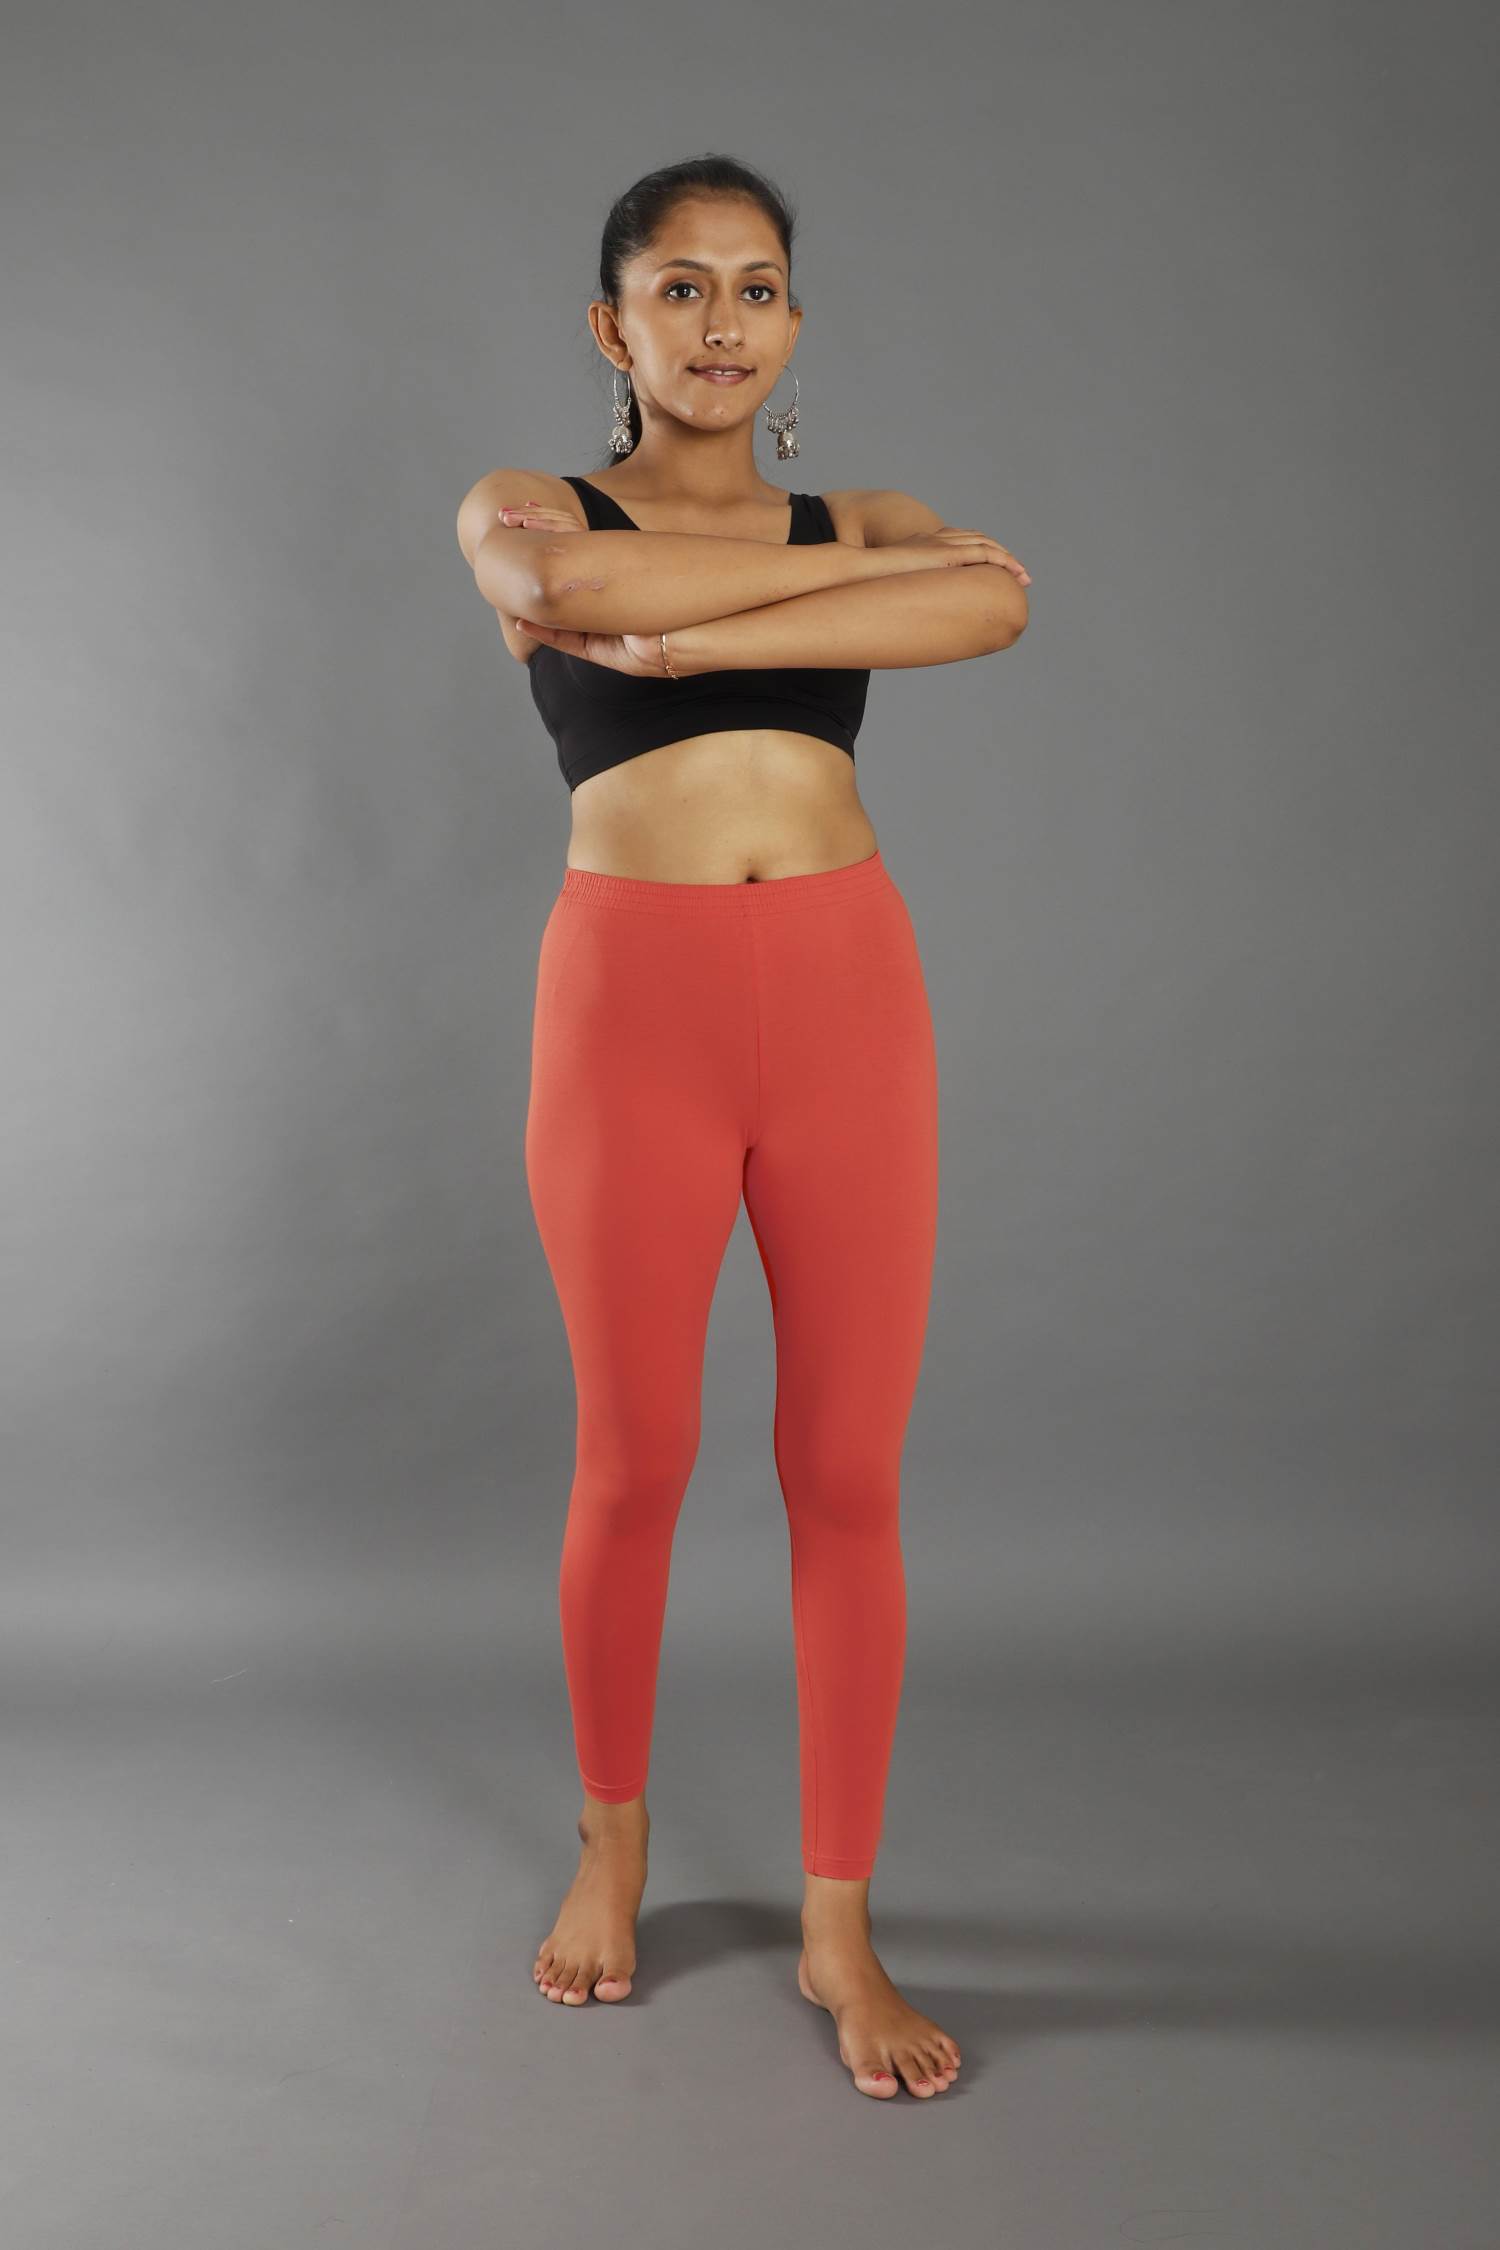 Orange Cotton Ankle Length Leggings for Women's and Girl's (Free Size) -  Elora Fashion - 2841655